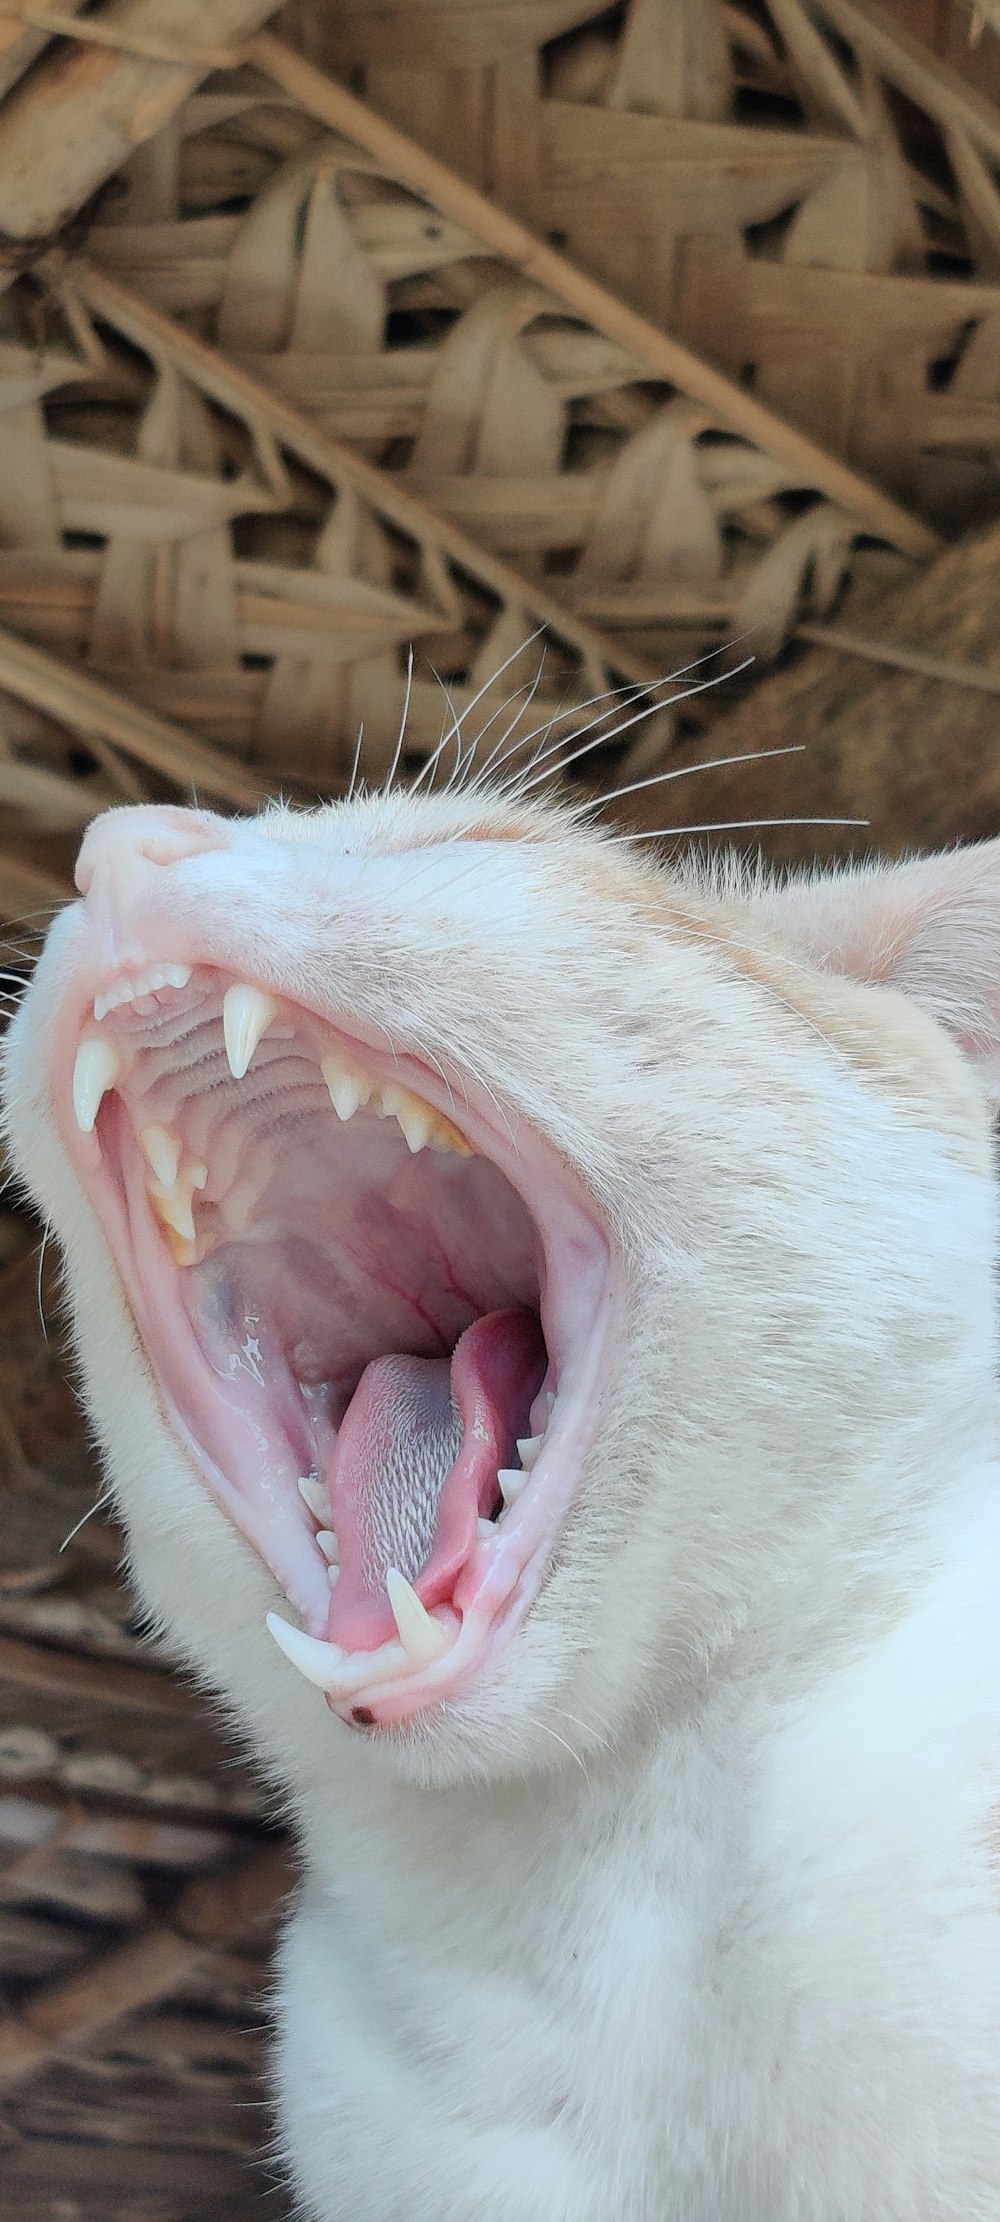 white cat opening mouth wide